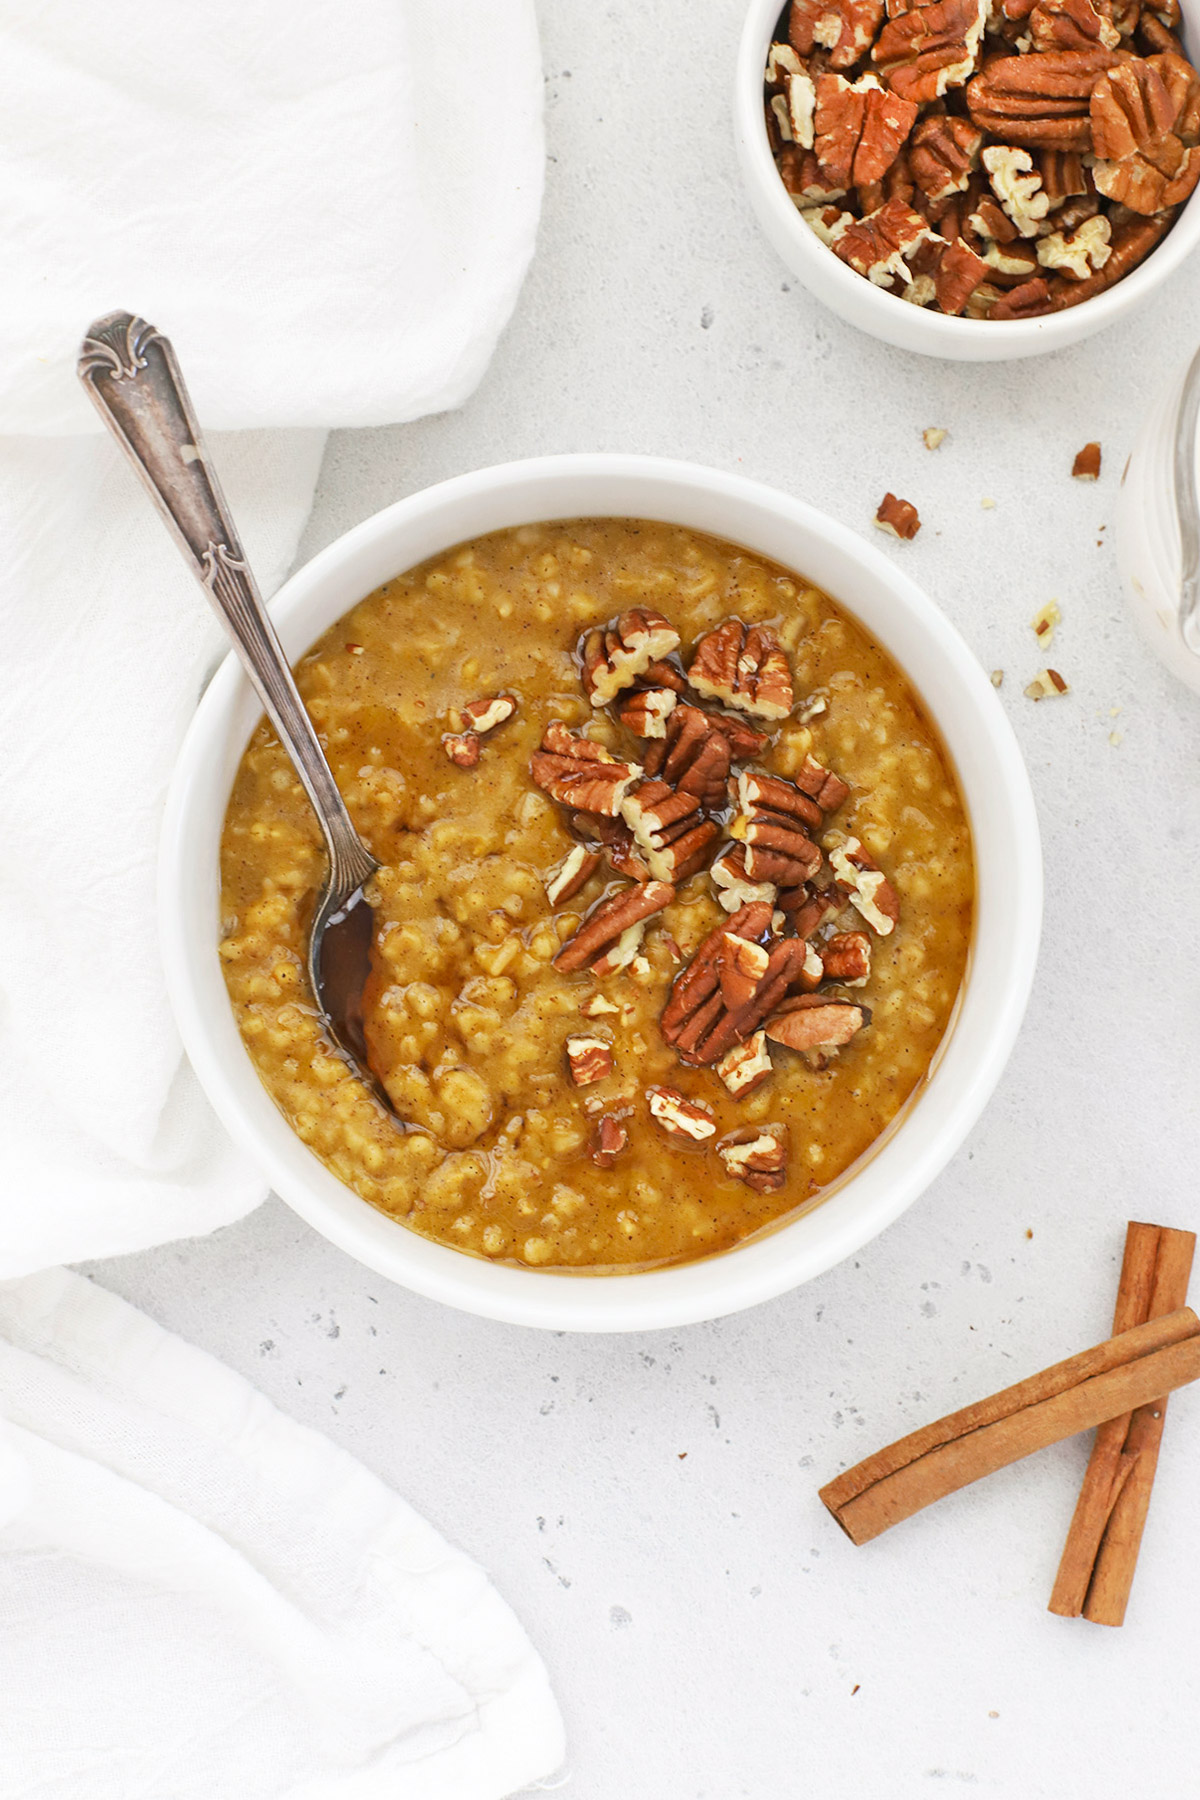 Overhead view of a bowl of Instant Pot Pumpkin Steel Cut Oats topped with maple syrup and pecans